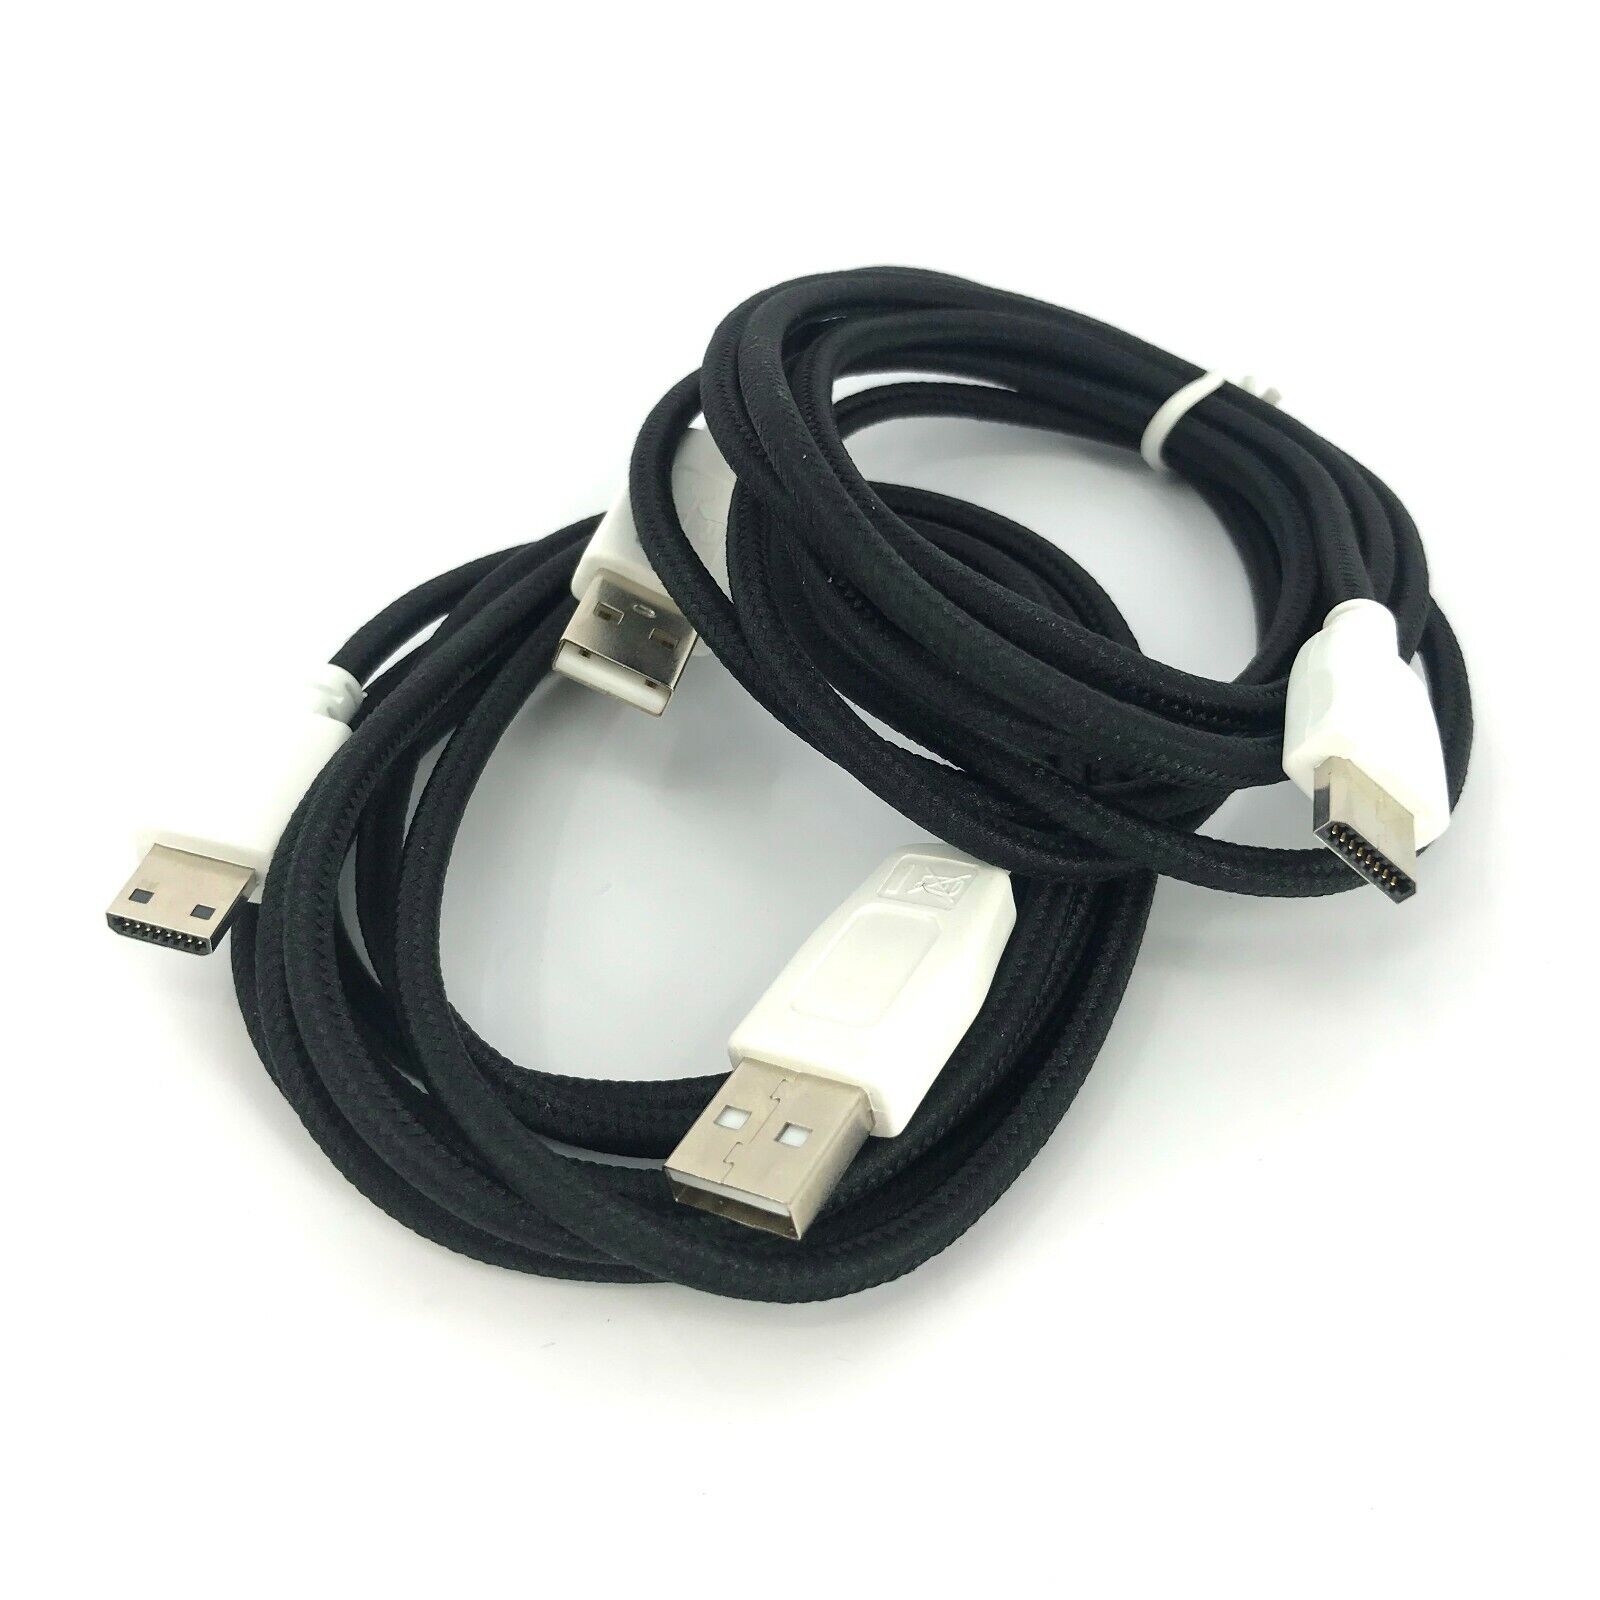 2 x USB Adapter Data replacement Cable for NABI Dream Tab 2S/Elev-8 Kid Tablet 